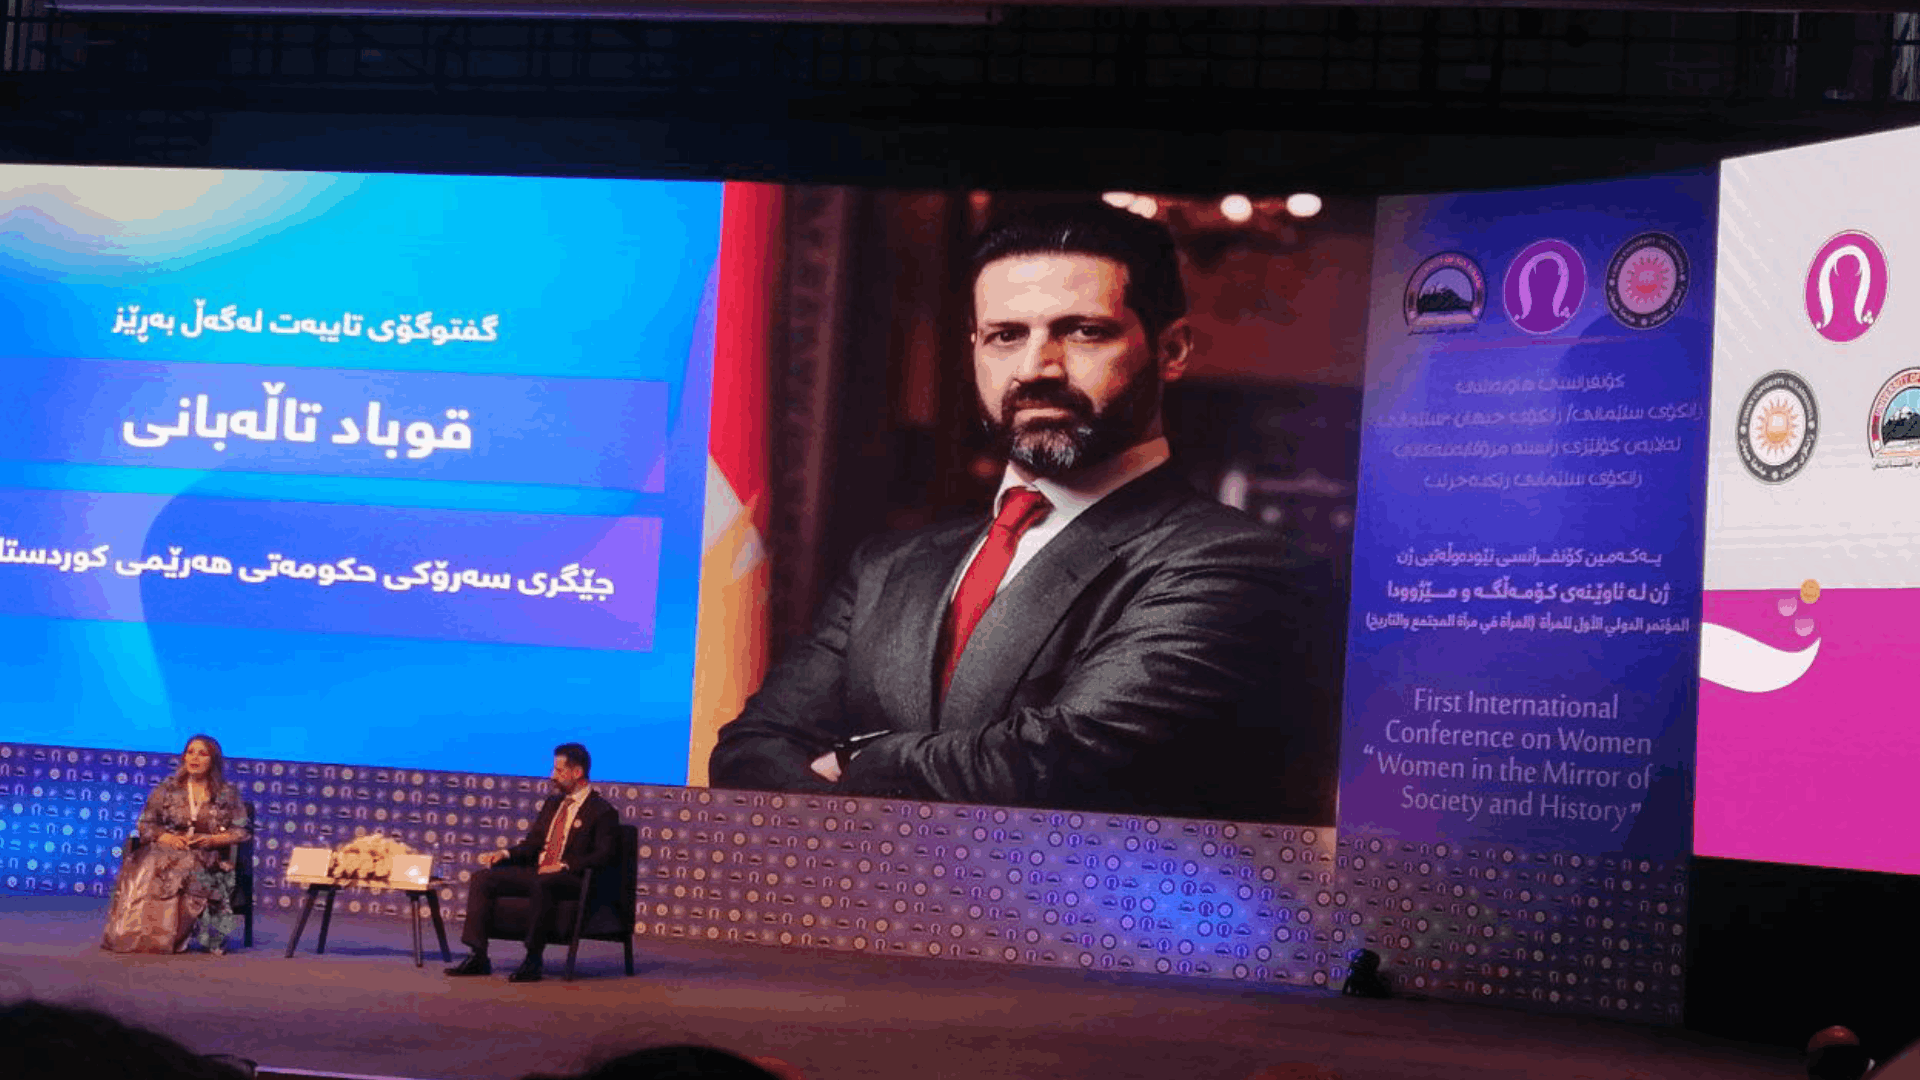 Qubad Talabani at the Women in the Mirror of Society & History conference